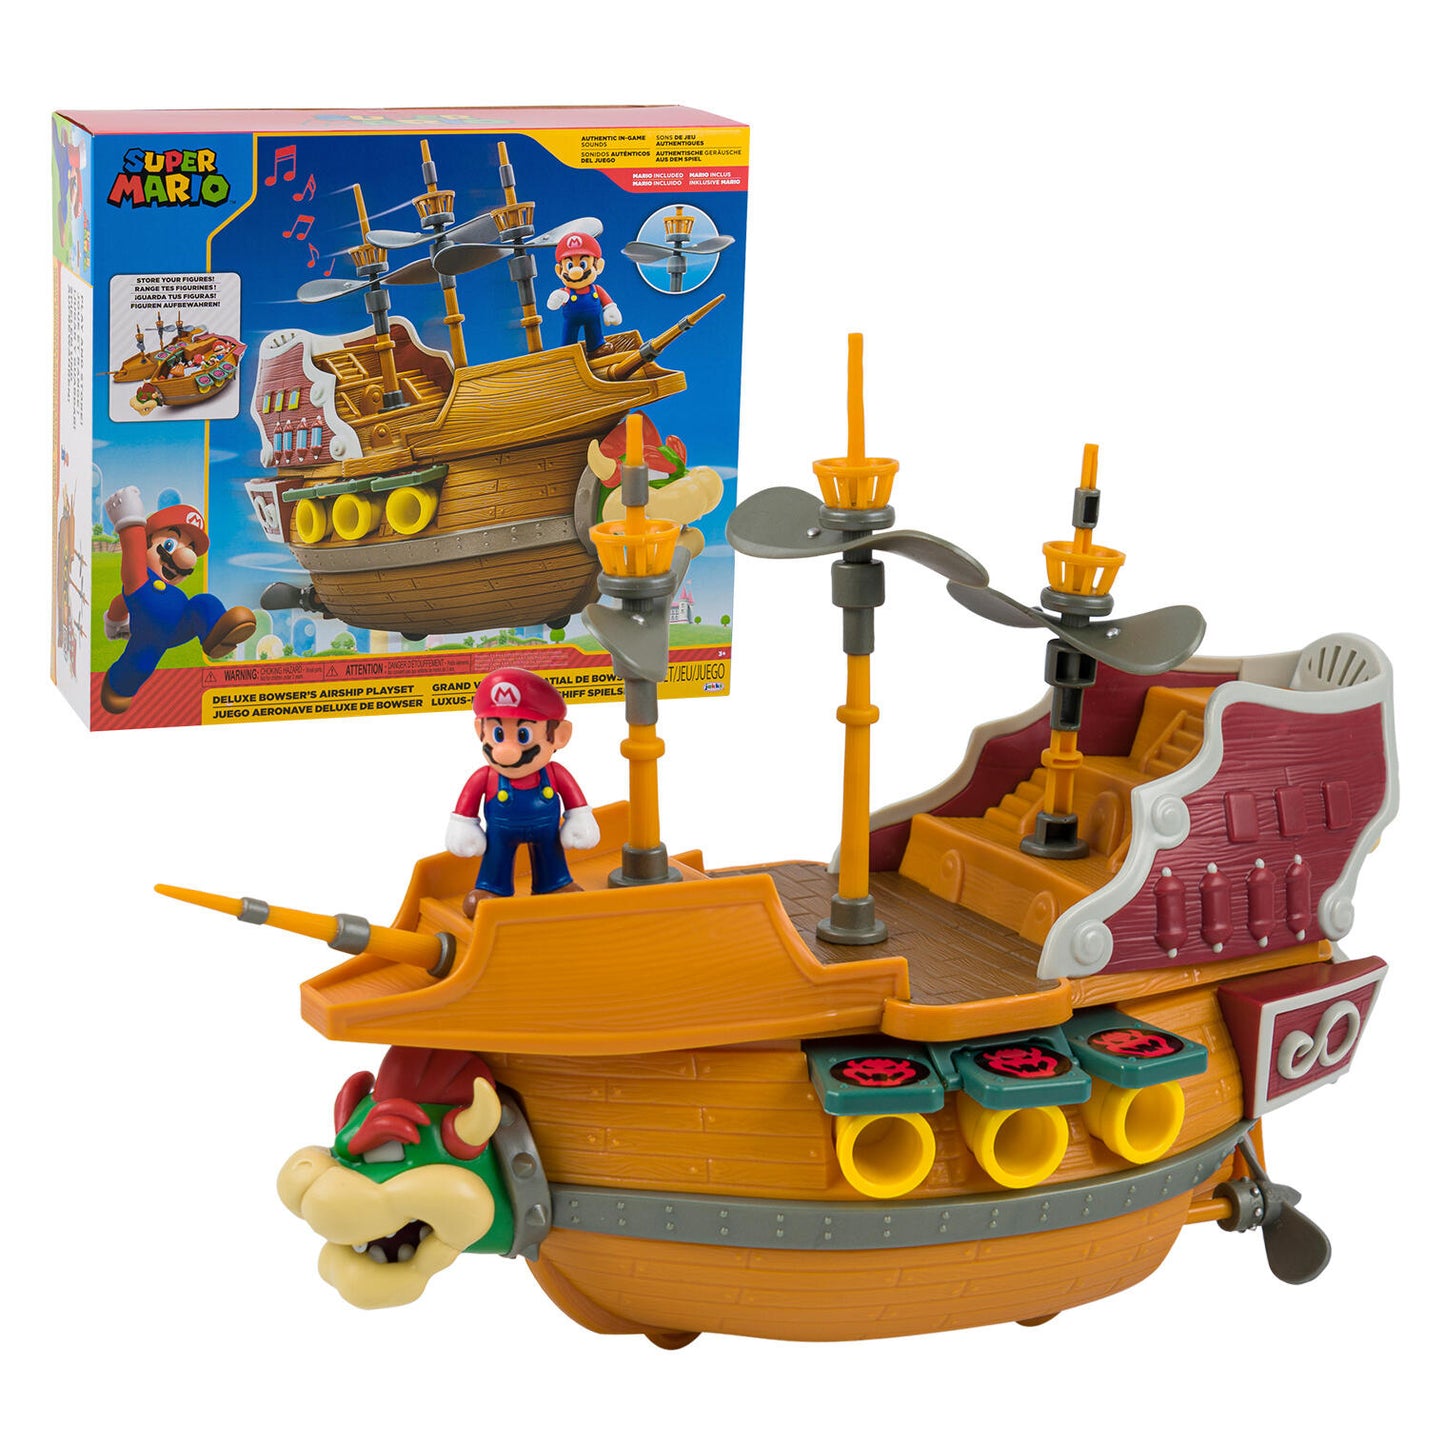 Super Mario Deluxe Bowser S Airship Playset